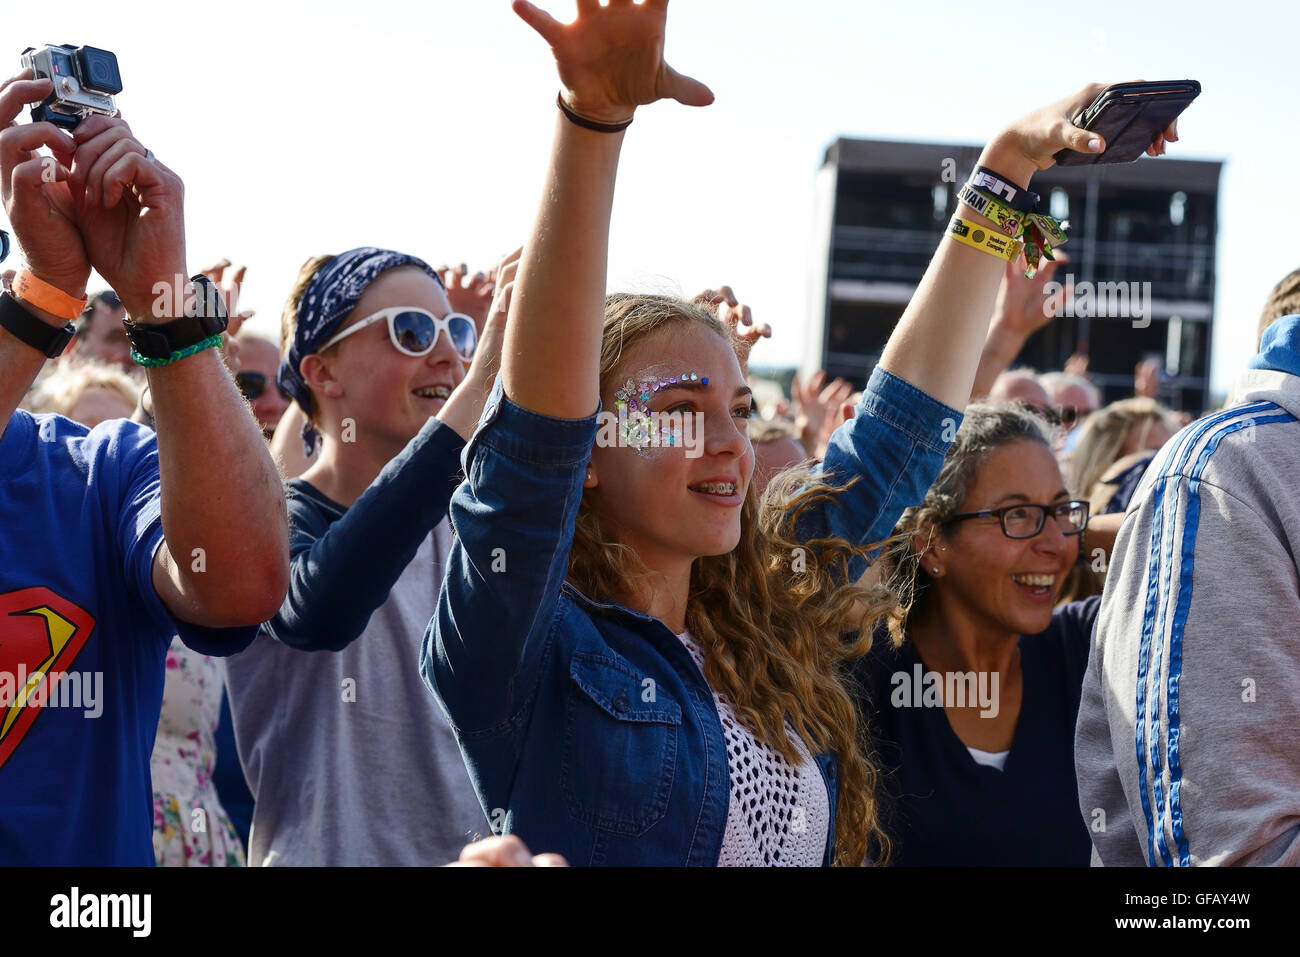 Carfest North, Bolesworth, Cheshire, UK. 30th July 2016. People at the Main stage. The event is the brainchild of Chris Evans and features 3 days of cars, music and entertainment with profits being donated to the charity Children in Need. Andrew Paterson/Alamy Live News Stock Photo